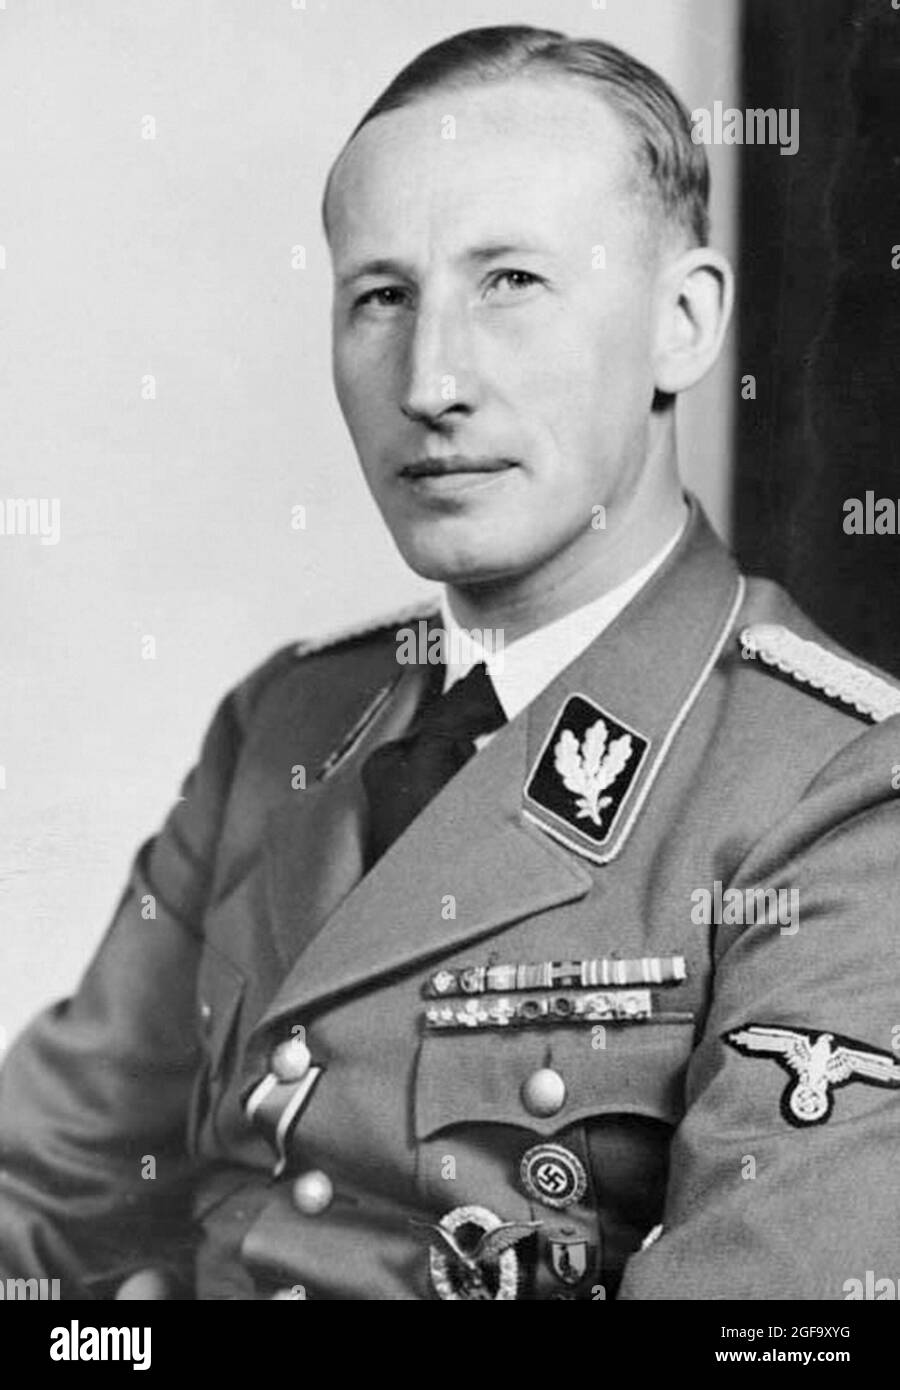 A portrait of Nazi and SS leader Reinhard Heydrich.  He was head of the Gestapo, Sicherheitsdienst (SD) and of the Reich Security Main Office ( Reichssicherheitshauptamt or RSHA) and is considered a chief architect of the holocaust. He was assassinated in 1942. Credit: German Bundesarchiv Stock Photo